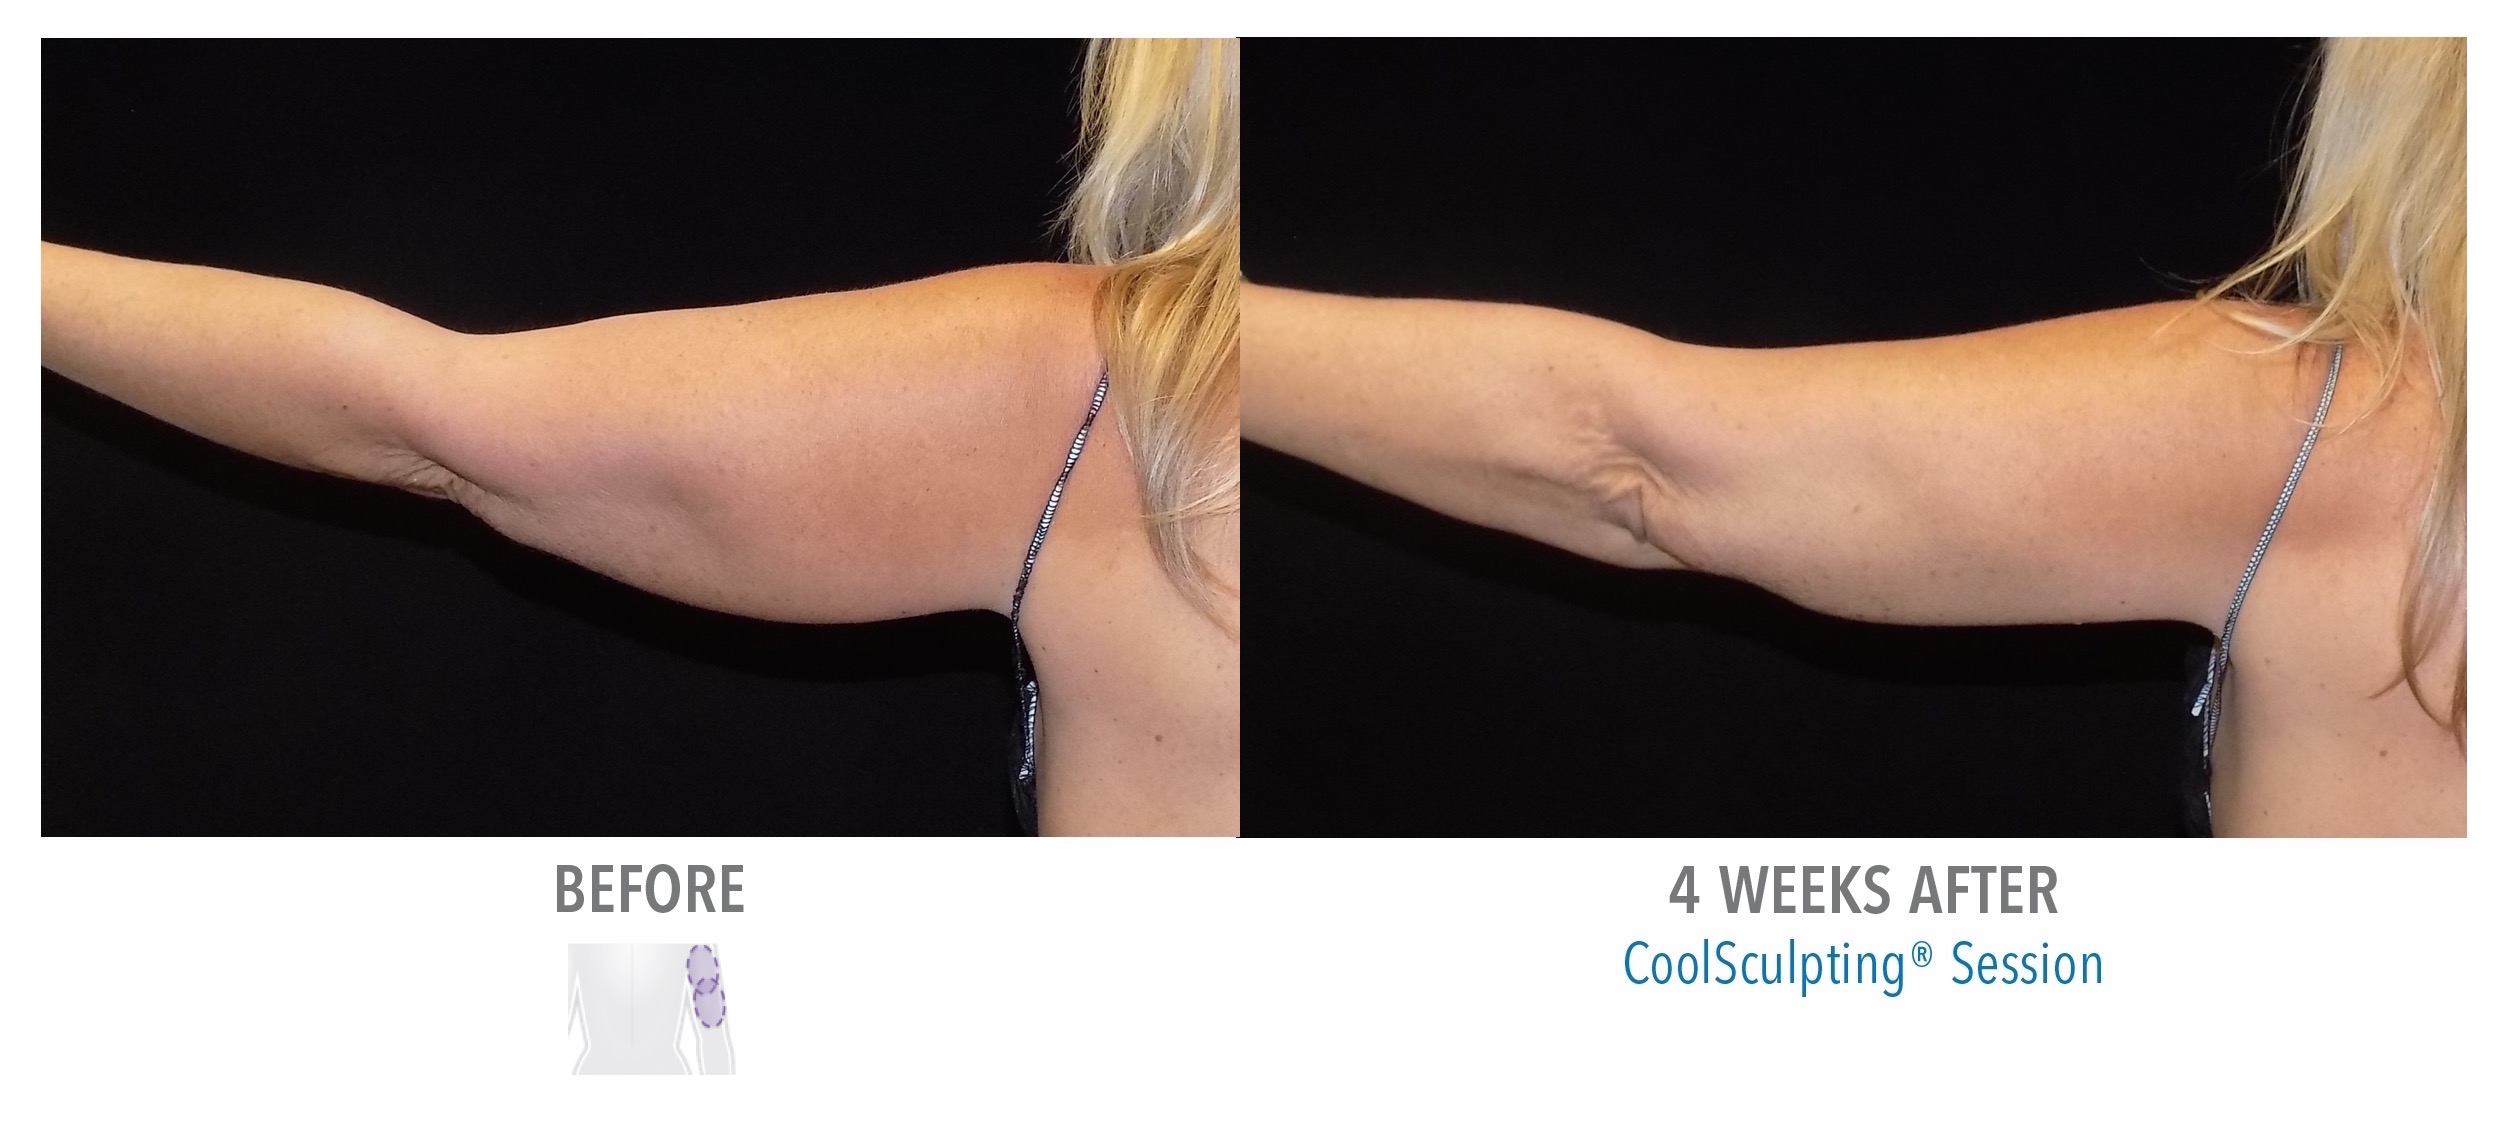 Arms | Coolsculpting | Cool Sculpting | Fat Removal | Erie PA.